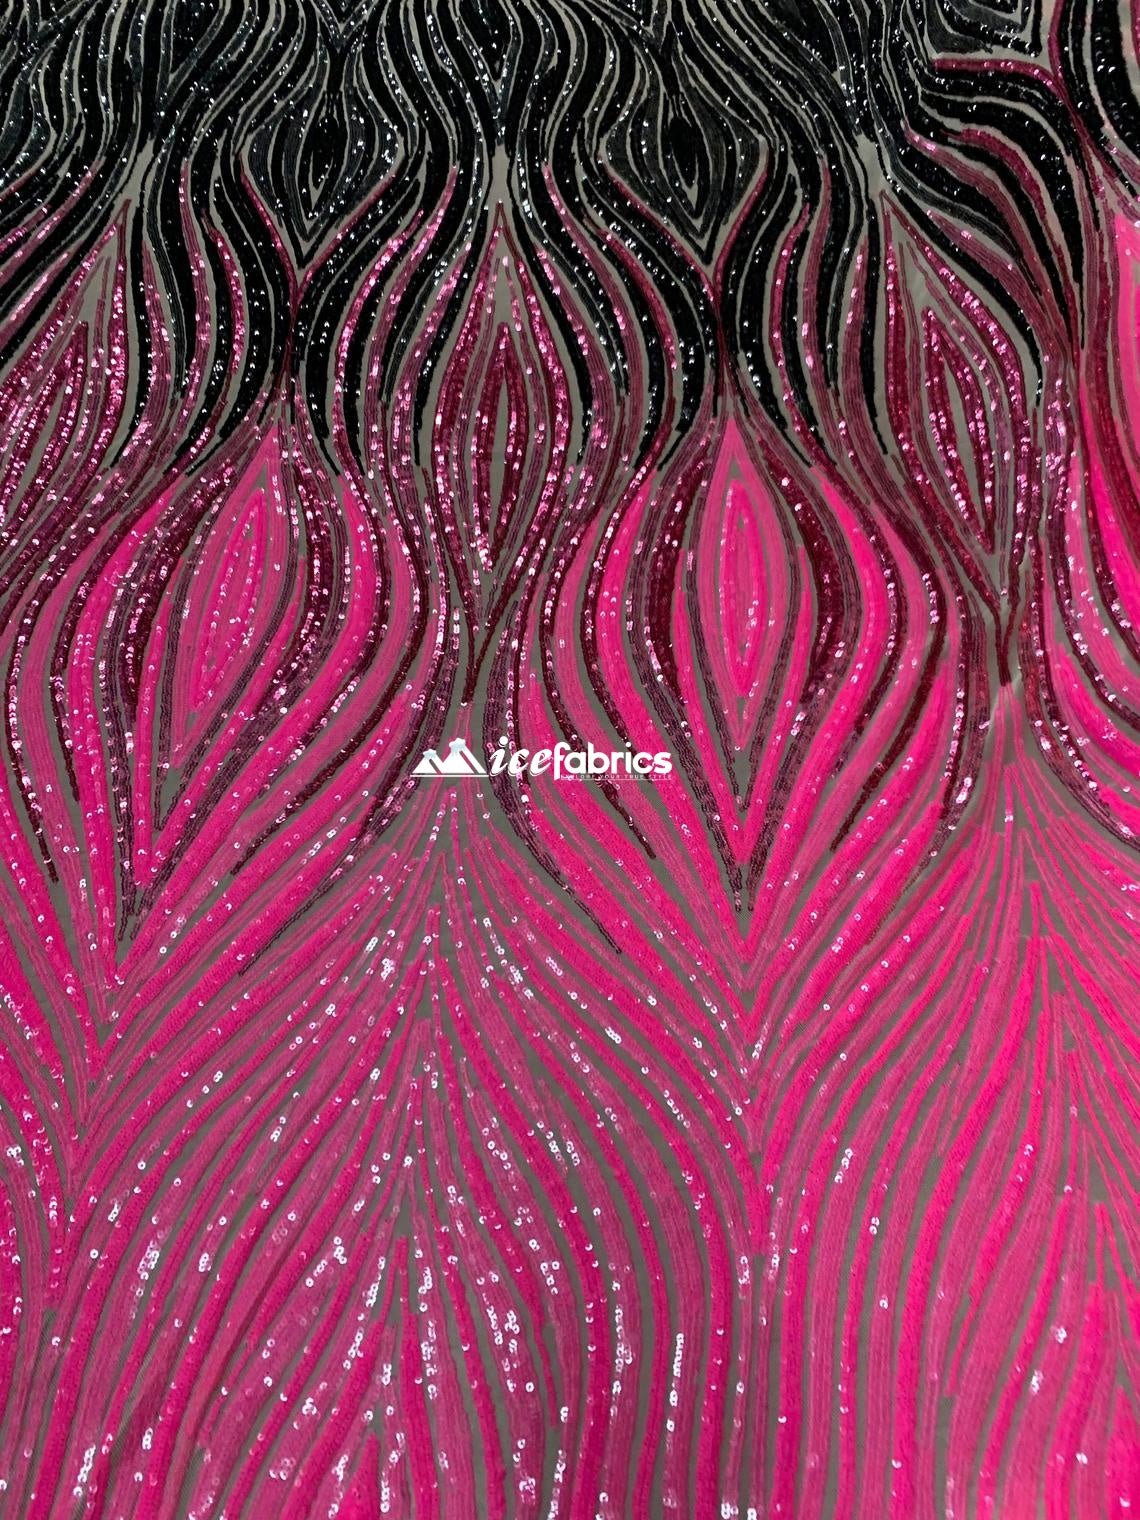 Iridescent Neon Pink Embroider 4 Way Stretch Sequins Fabric By The YardICEFABRICICE FABRICSIridescent Neon Pink Embroider 4 Way Stretch Sequins Fabric By The Yard ICEFABRIC